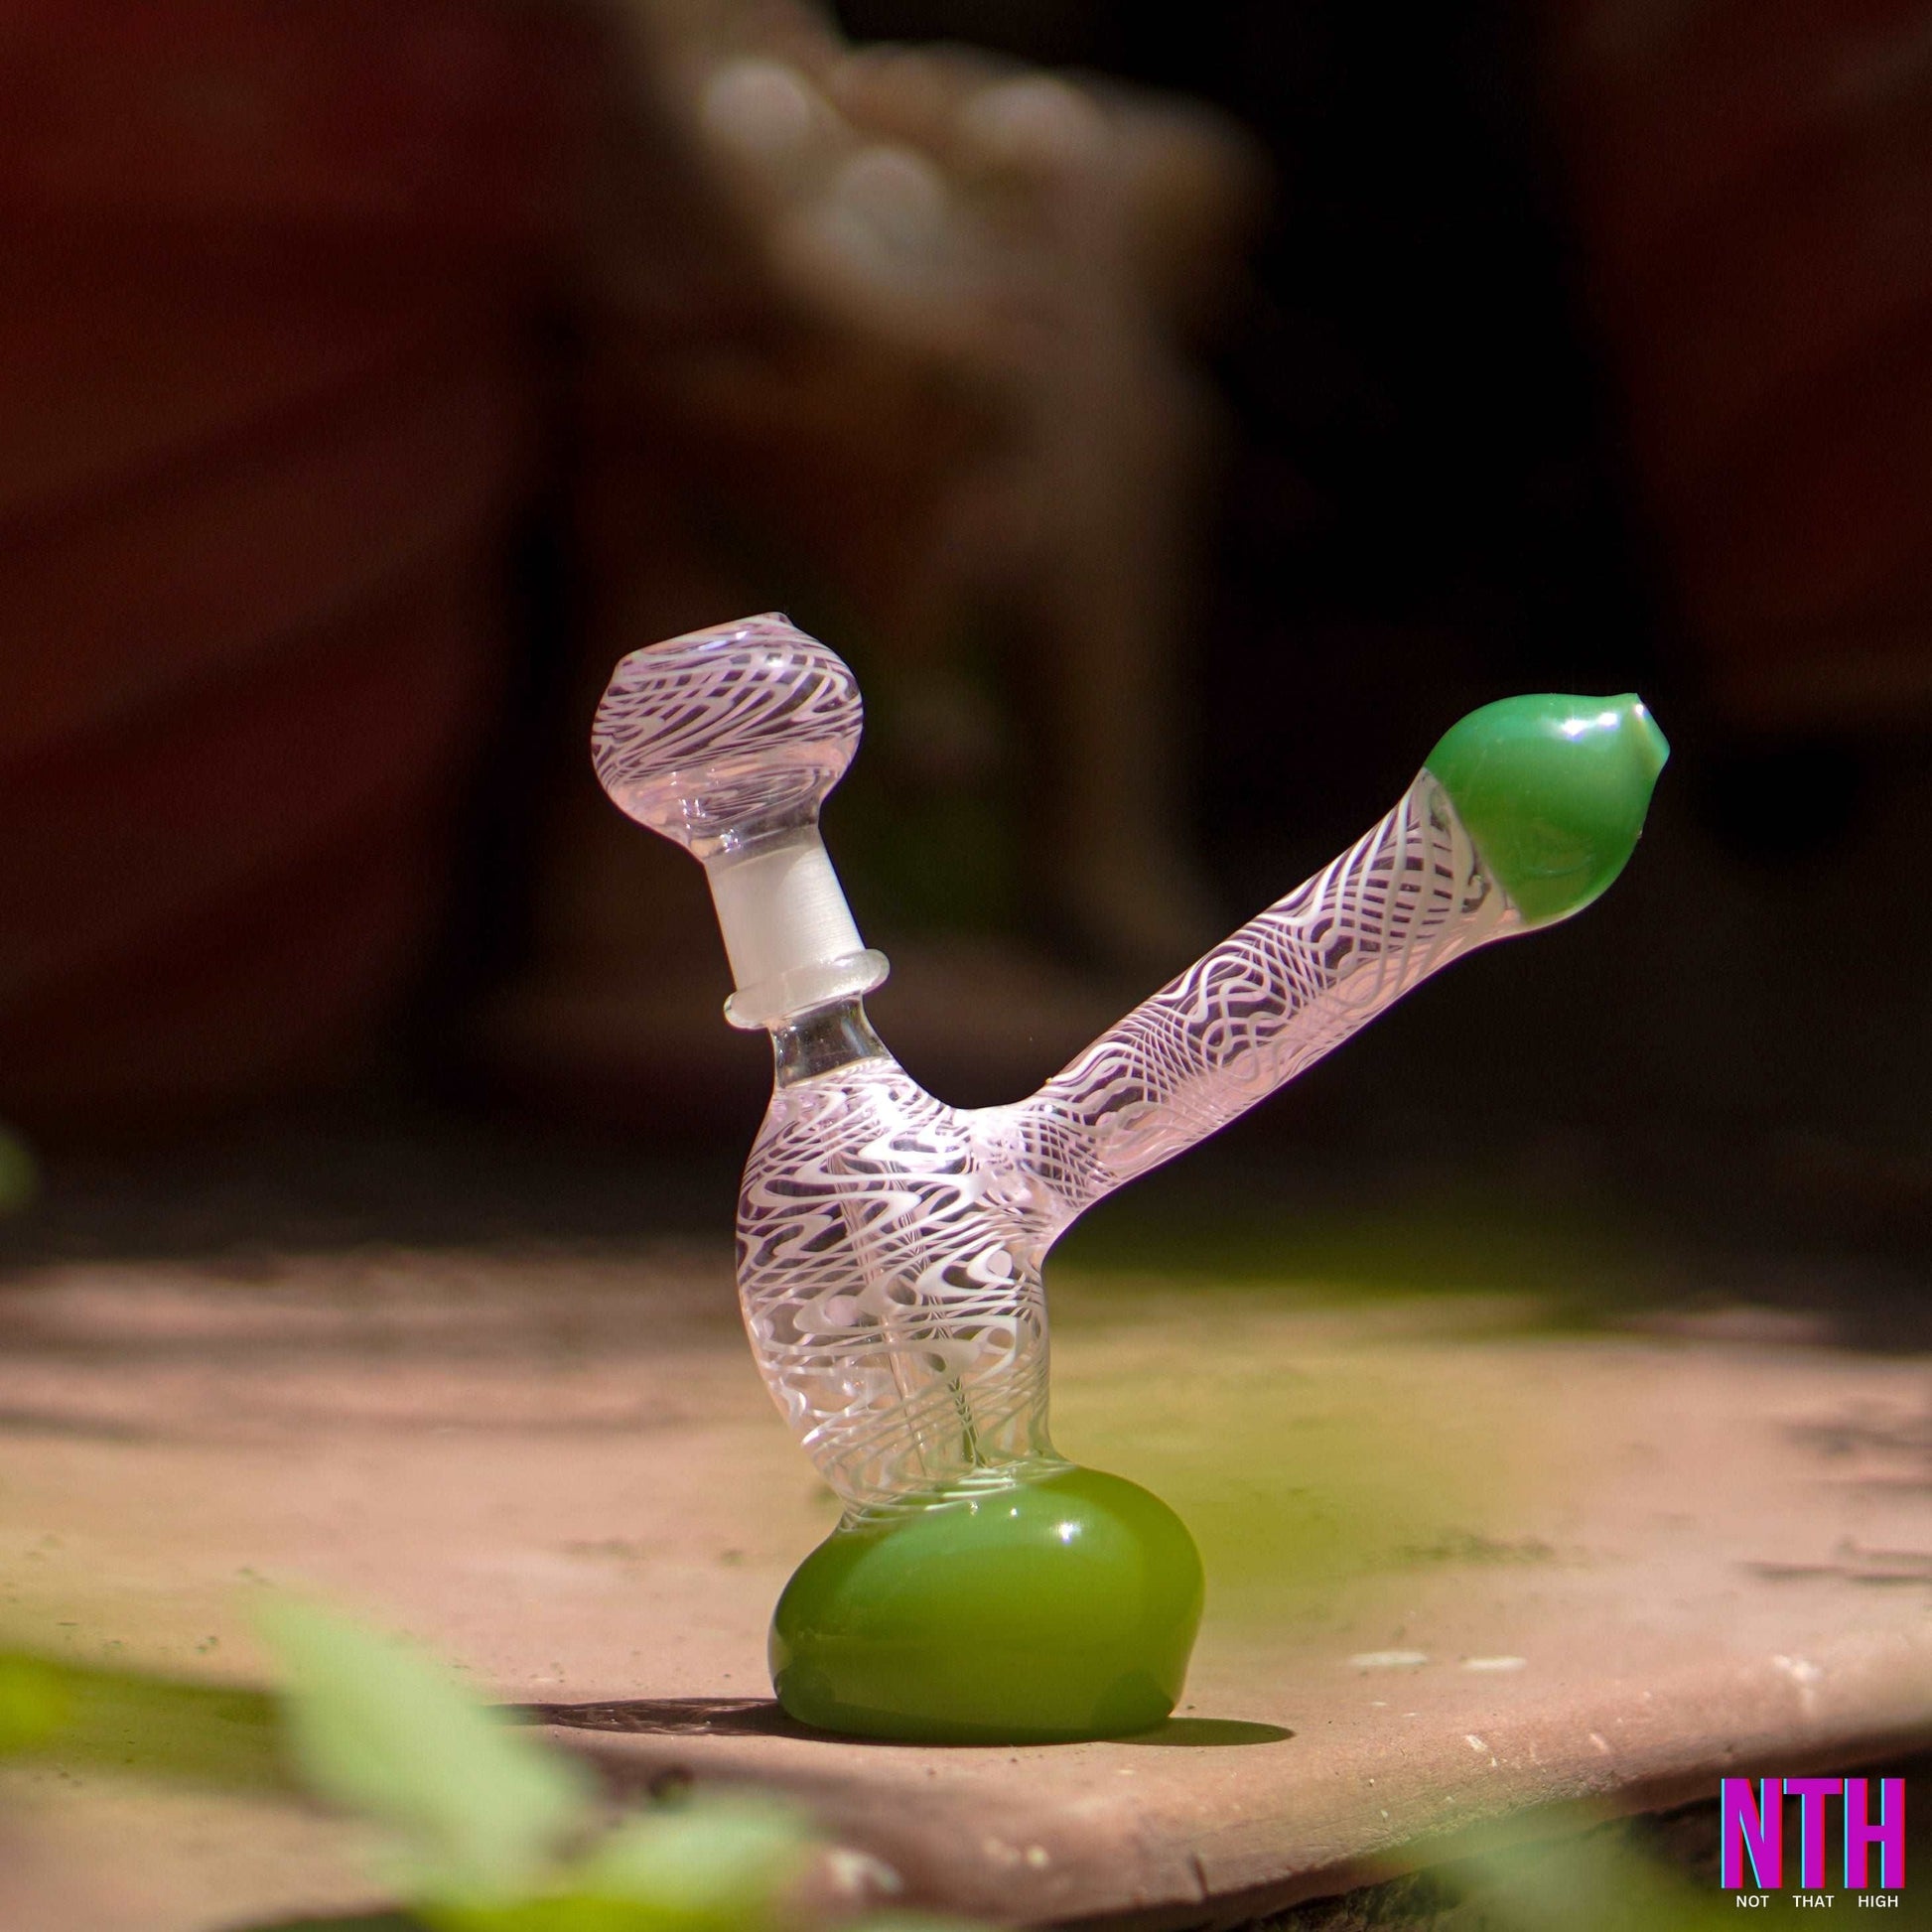 Onlybongs Simple Water Pipe Ornament | Not That High